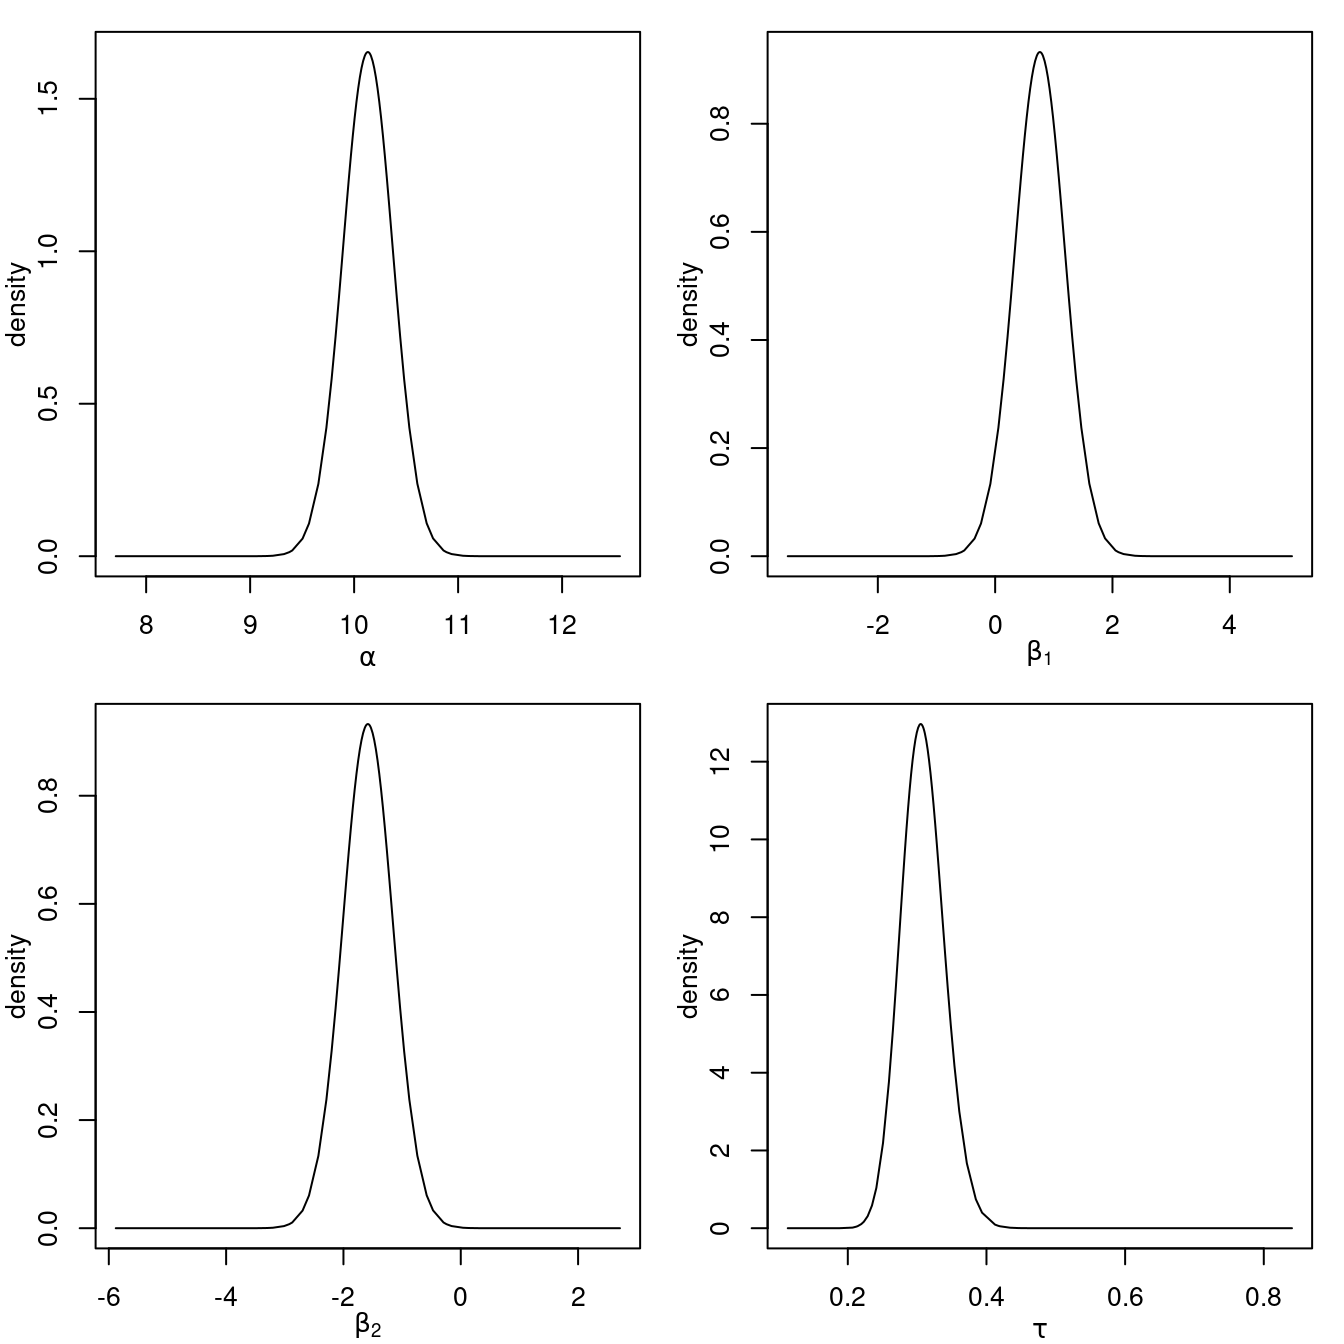 Posterior marginals of the parameters in the linear model fitted to the SPDEtoy dataset.